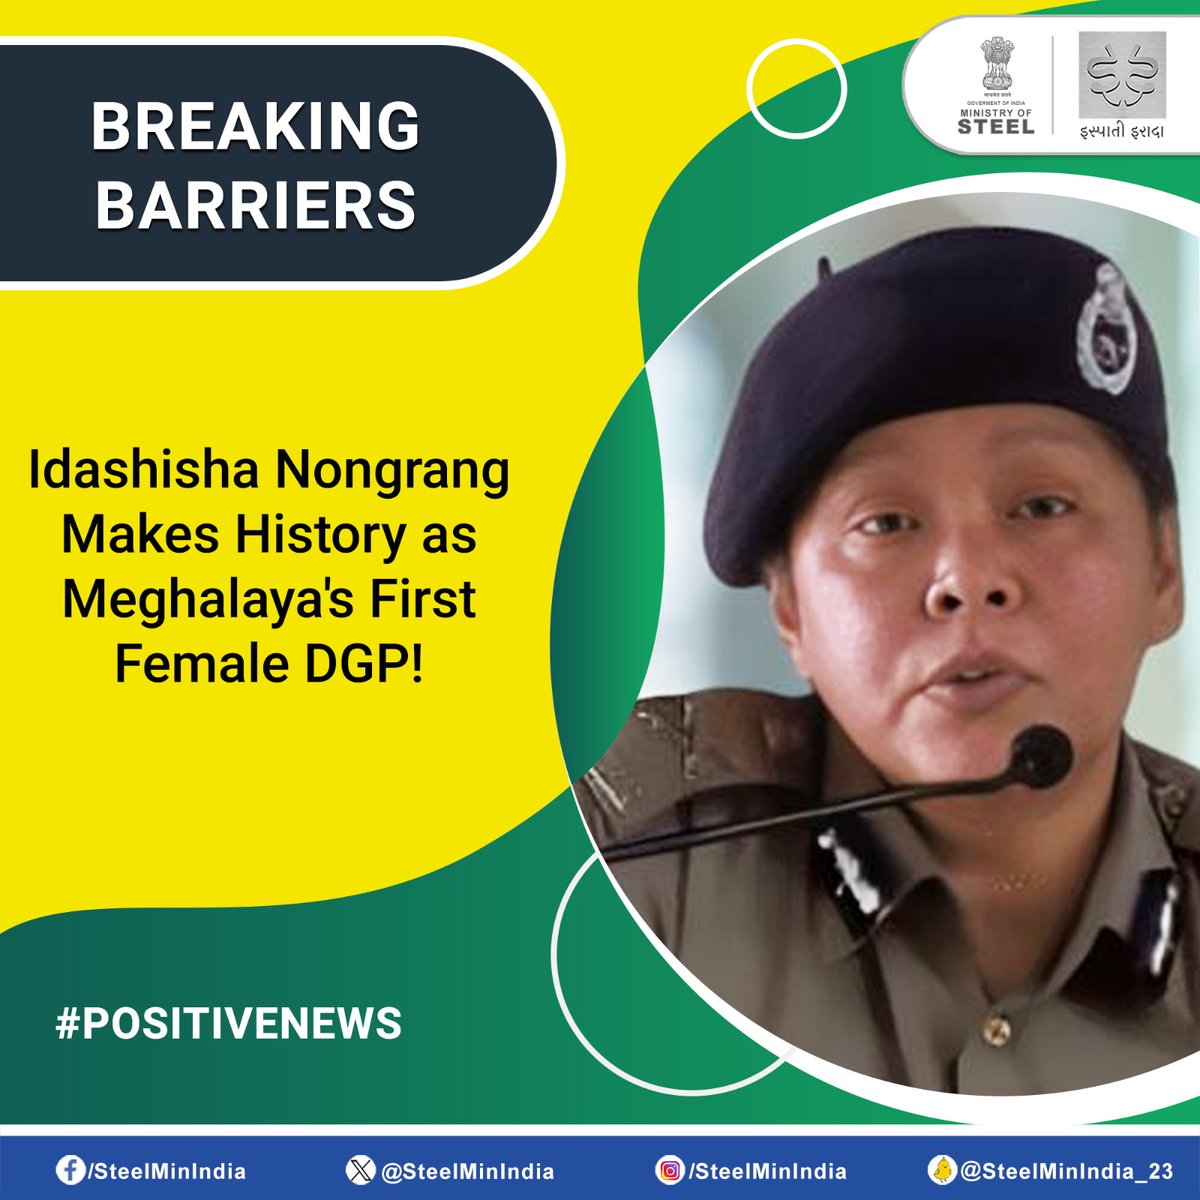 #BreakingBarriers and setting a powerful example! #IdashishaNongrang achieves a historic milestone as she becomes the #first woman to hold the esteemed position of #DGP in Meghalaya! #PositiveNews